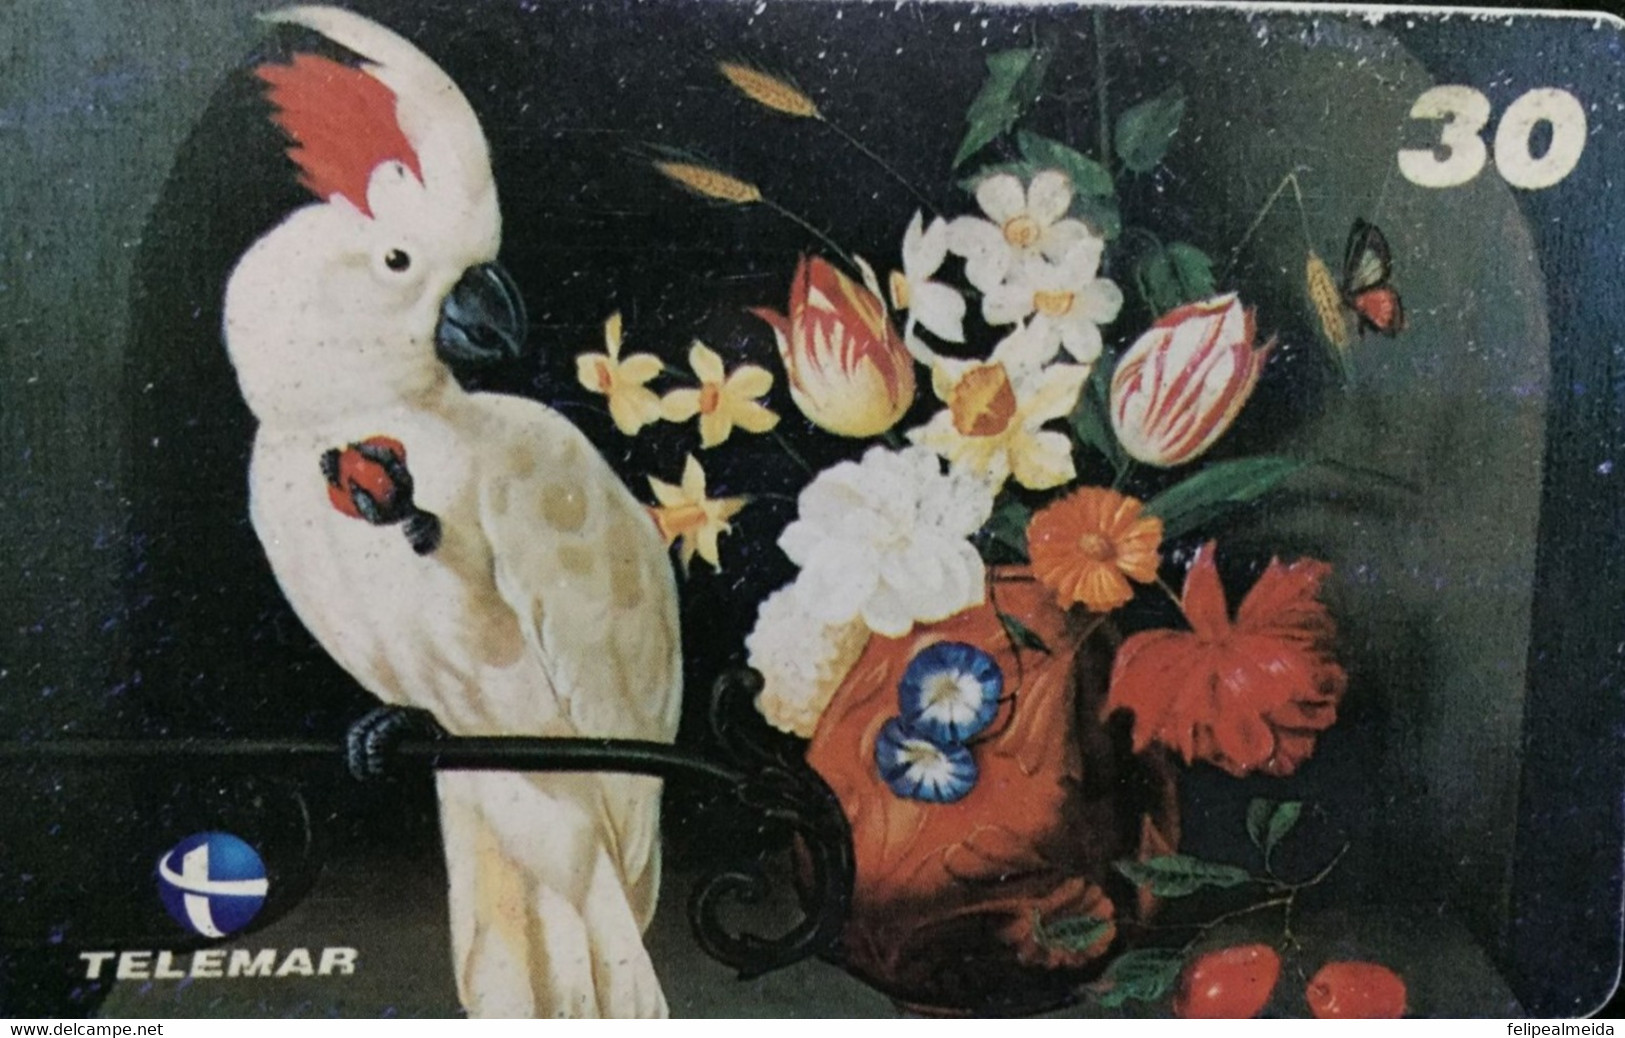 Phone Card Manufactured By Telemar In 2000 - Painting Cockatoo And Flowers - Painter Nilton Mendoça - Painting